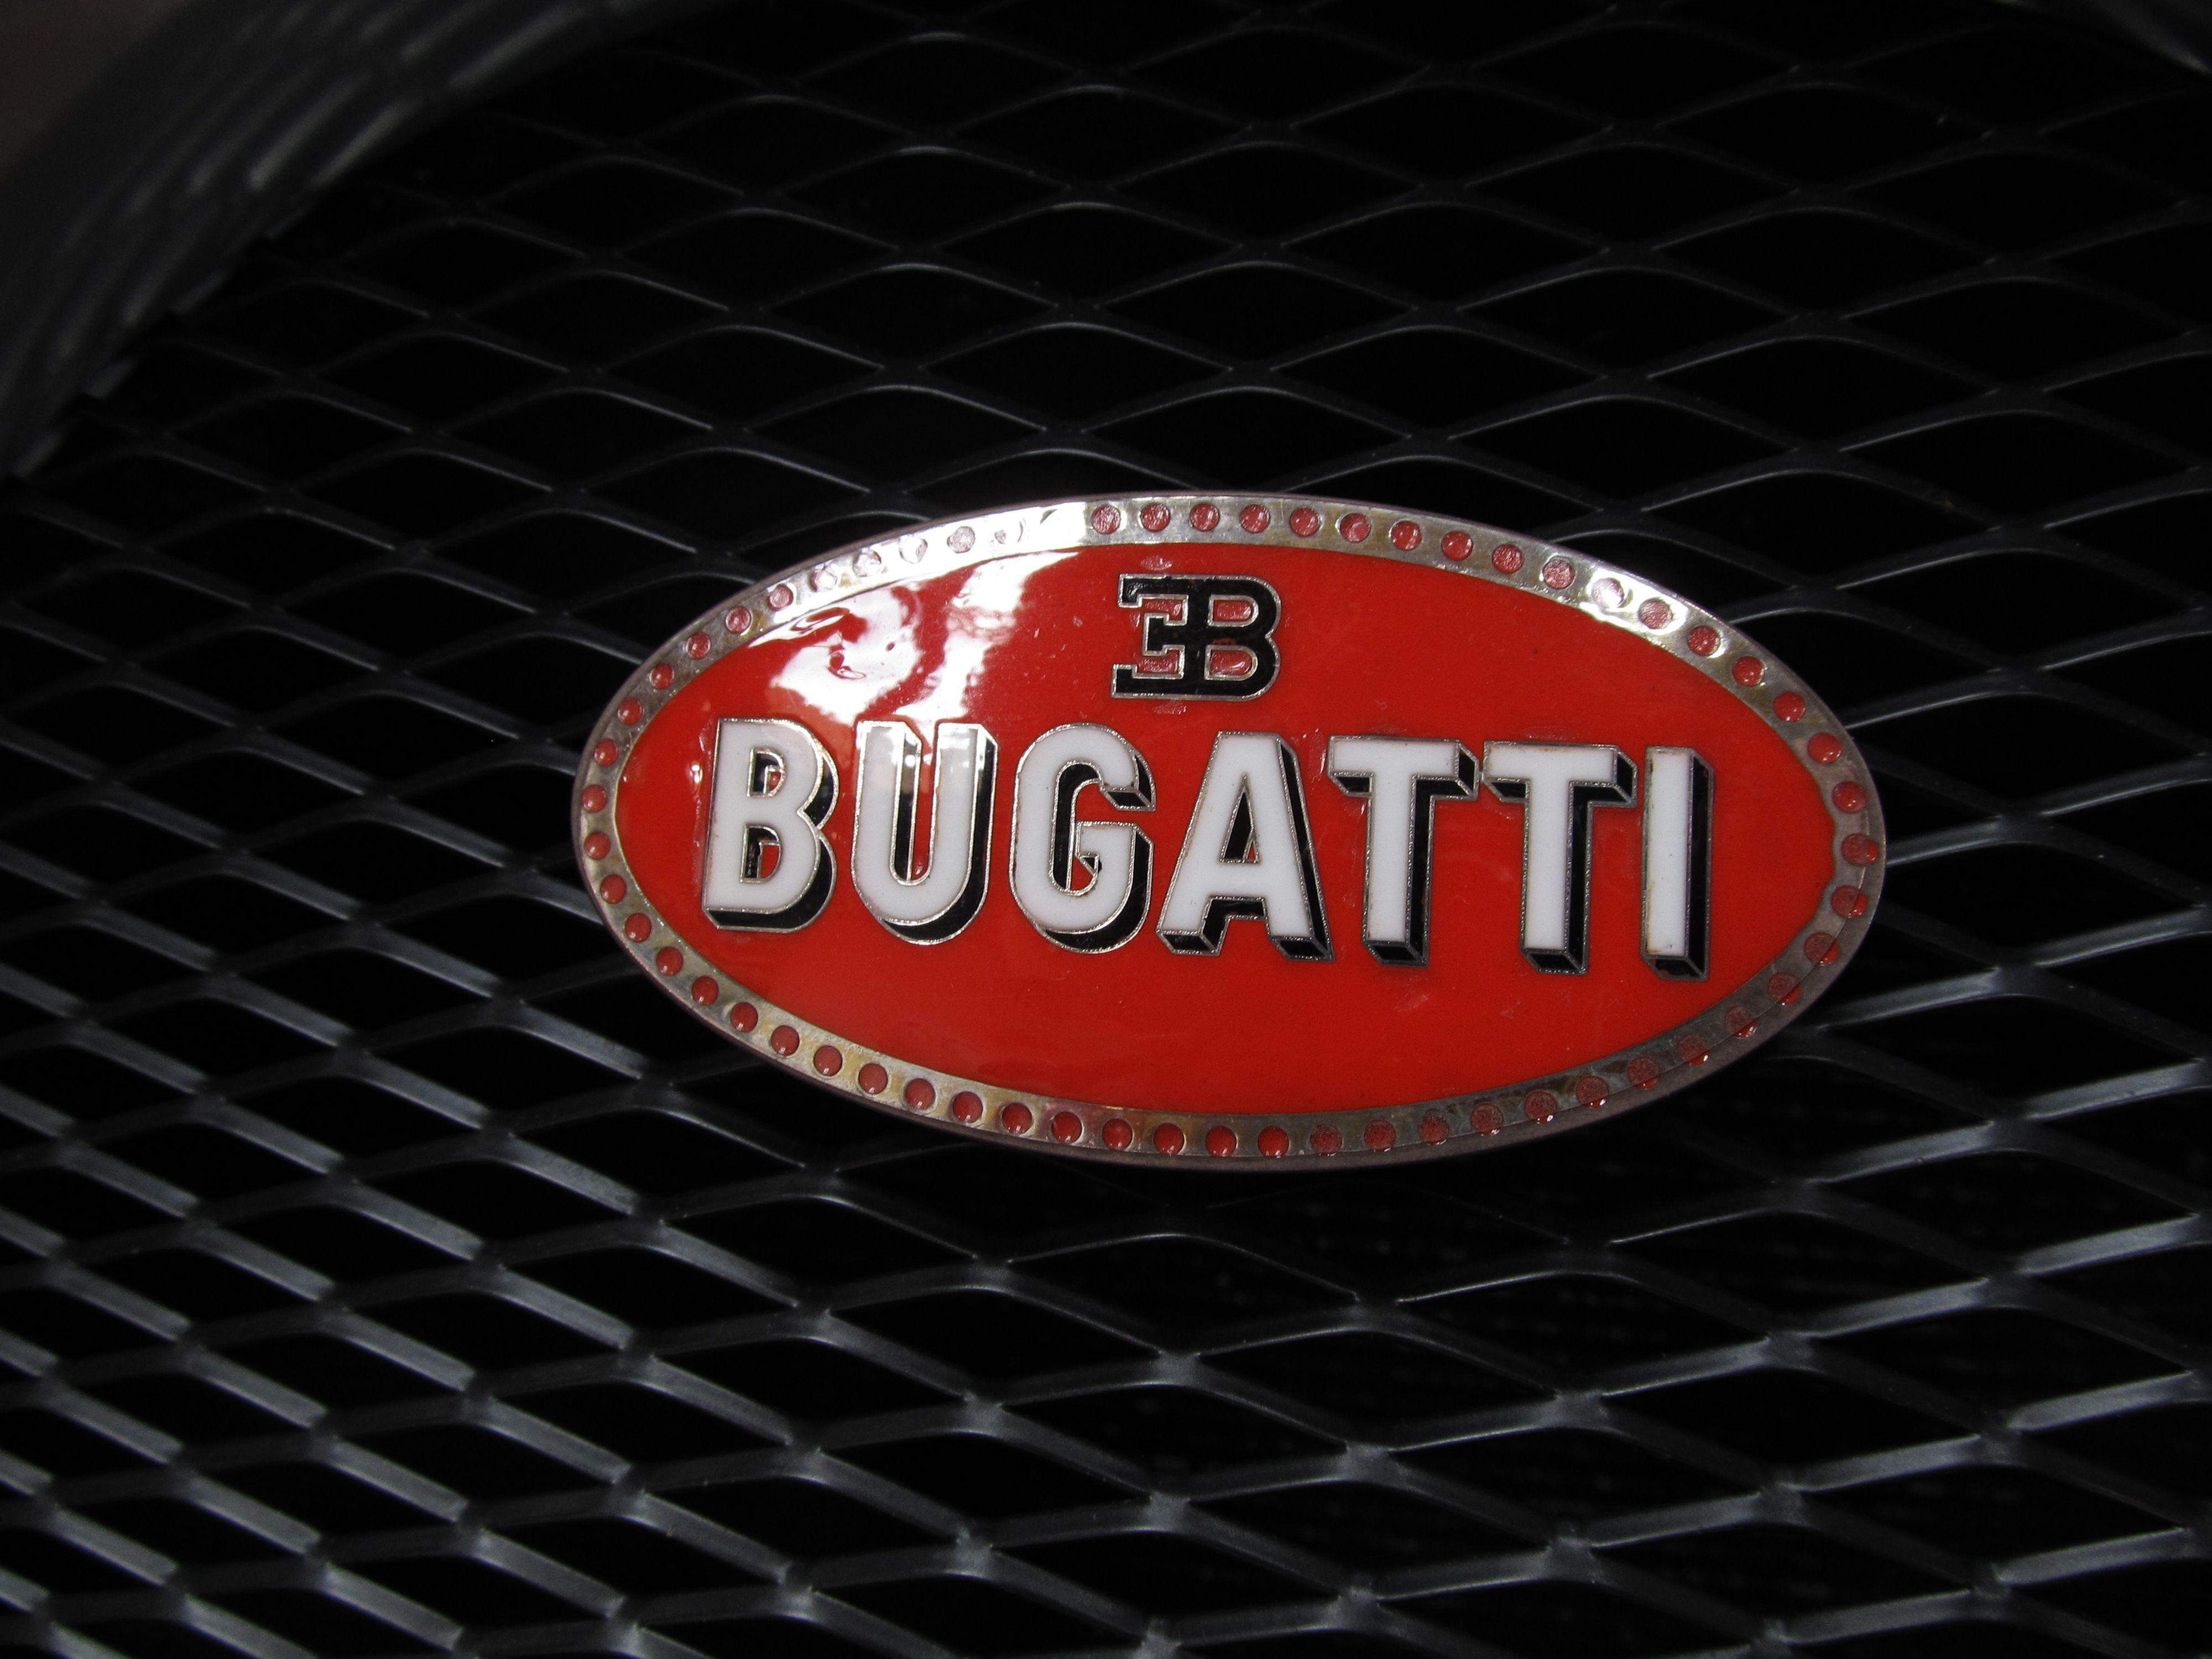 What Automobile Has a Red and White Logo - Bugatti Logo, Bugatti Car Symbol Meaning and History | Car Brand ...